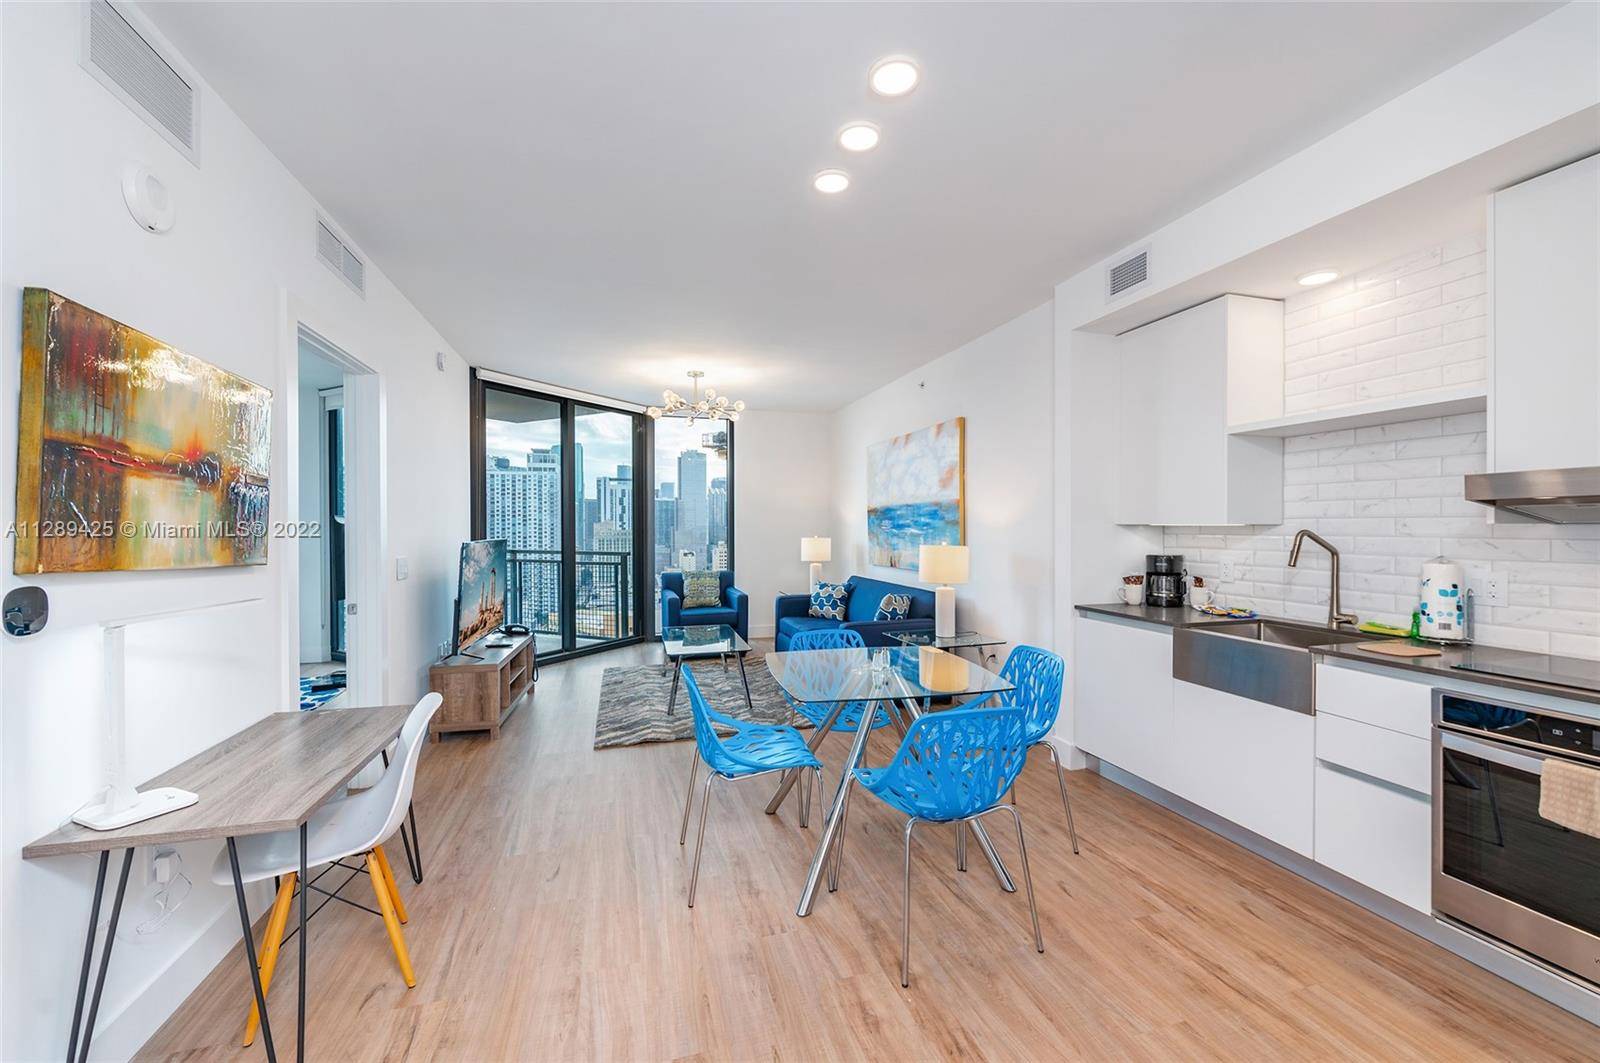 One bedroom luxury apartment for rent 30 days or more short term or long term at the Bezel Miami in Downtown, with beautiful design The Bezel is luxury living close ...